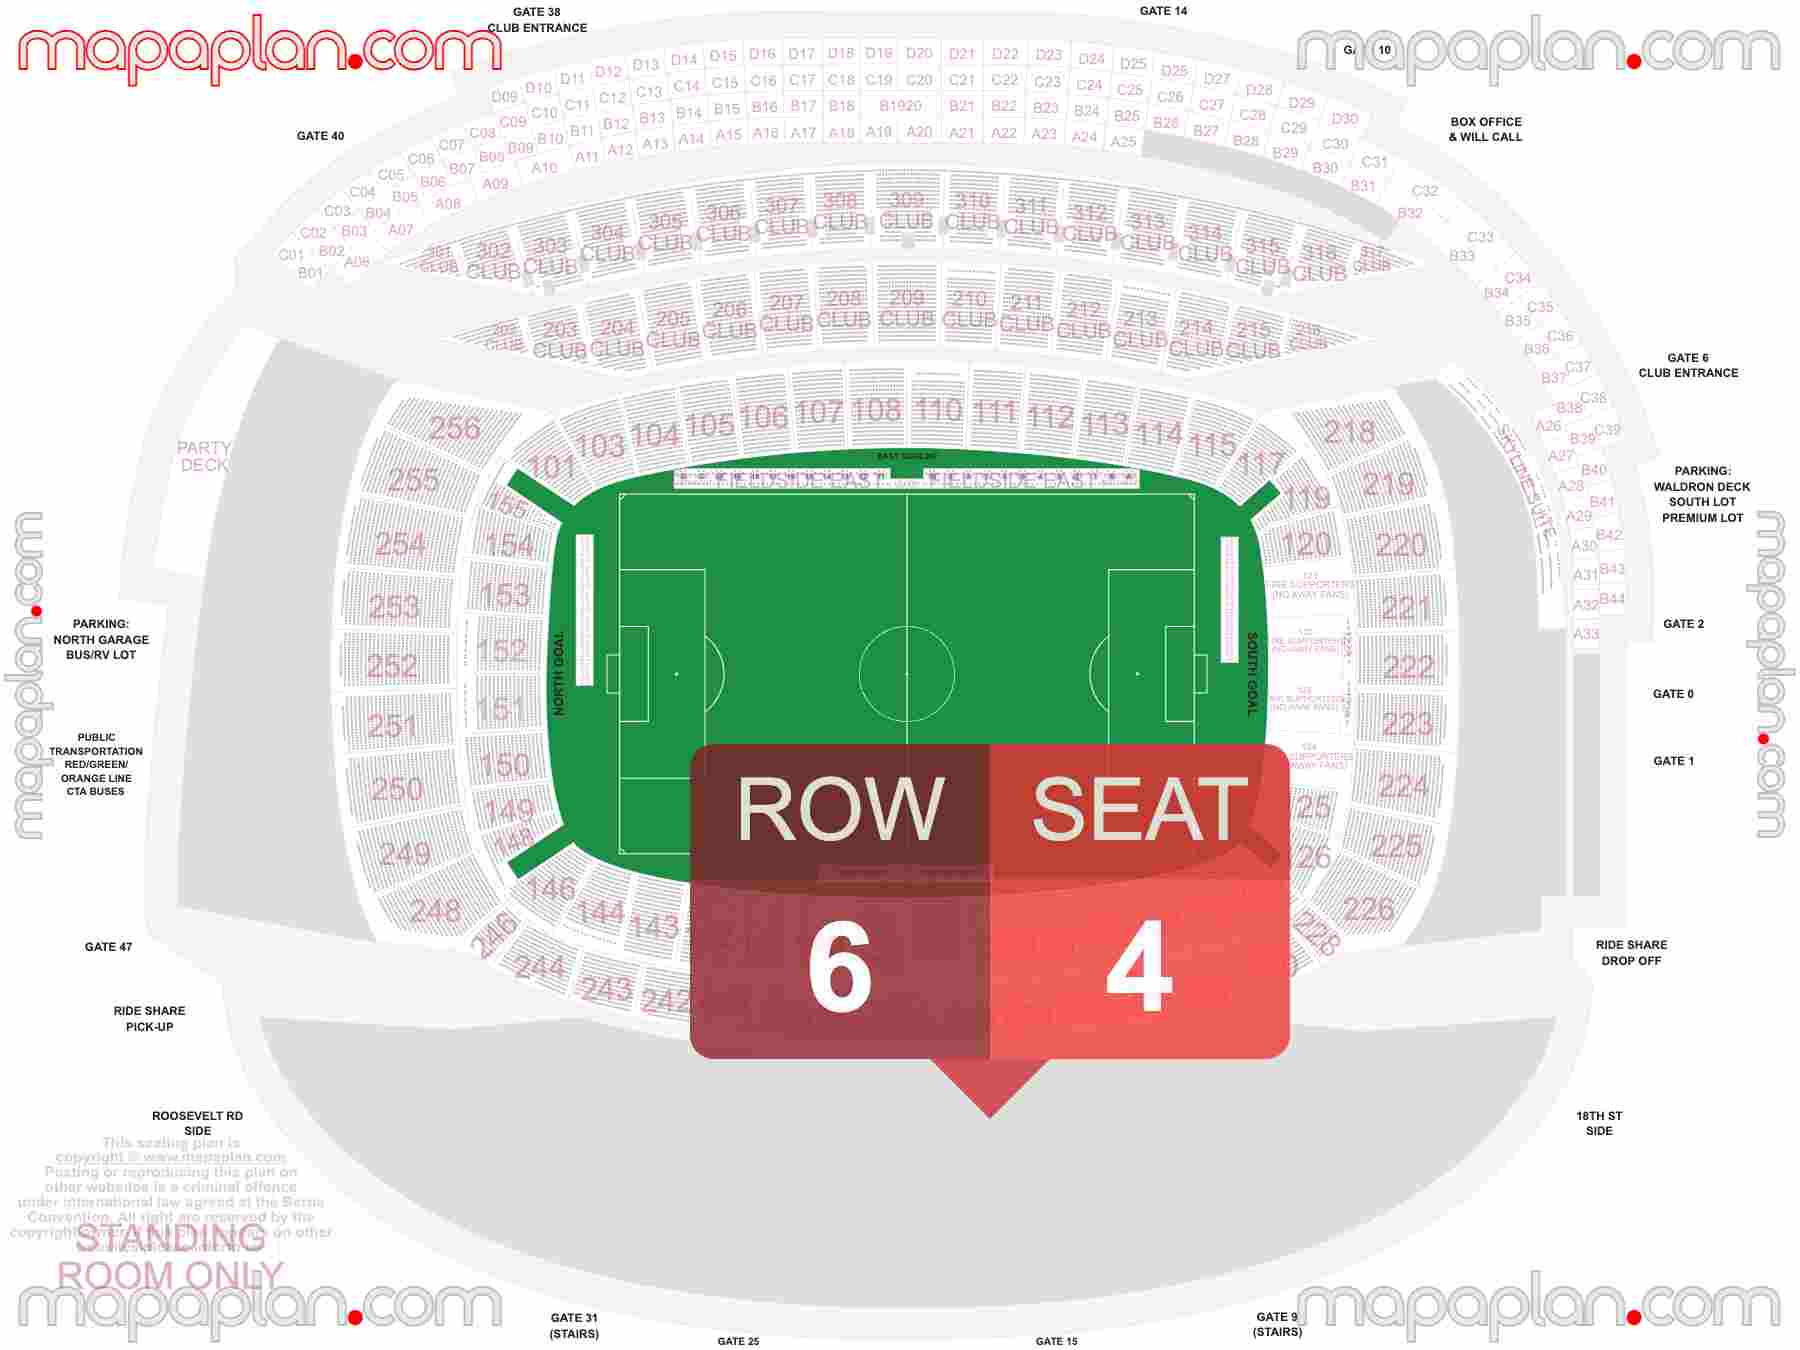 Chicago Soldier Field seating chart Fire FC soccer find best seats row numbering system plan showing how many seats per row - Individual 'find my seat' virtual locator